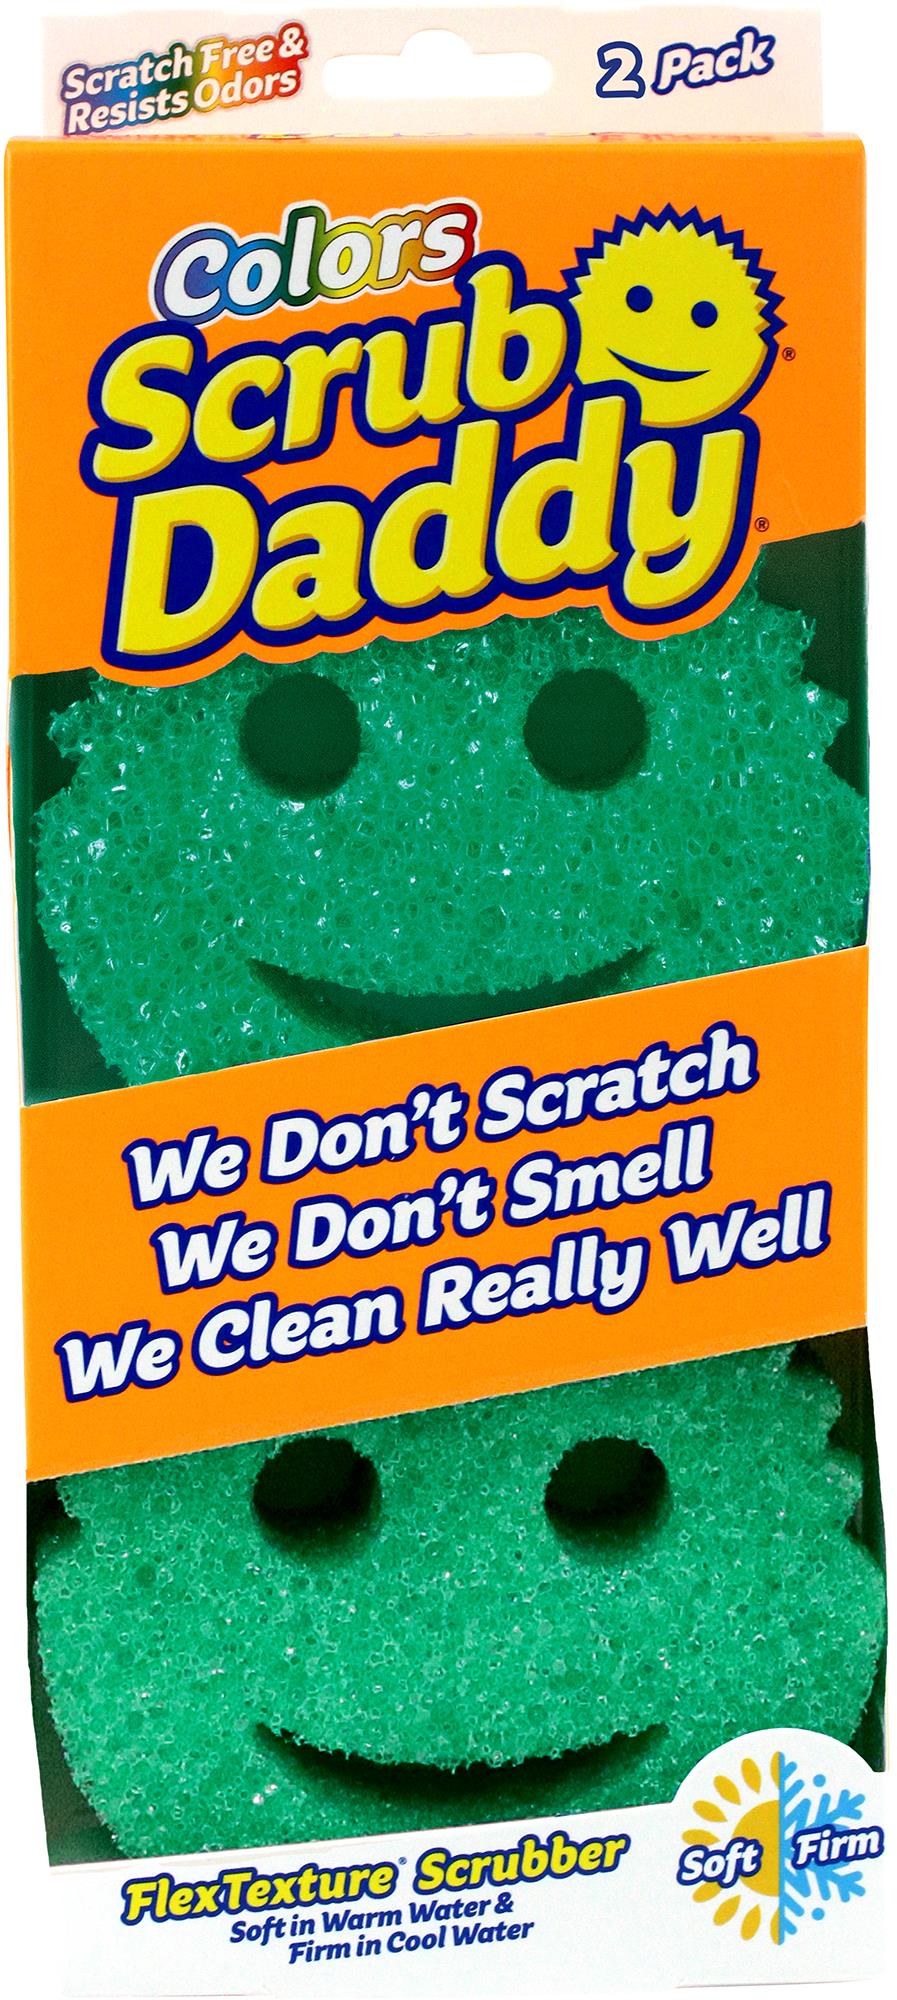 https://lyko.com/globalassets/product-images/scrub-daddy-green-twin-3375-107-0002_1.jpg?ref=A636B50D7A&w=897&h=2000&quality=75